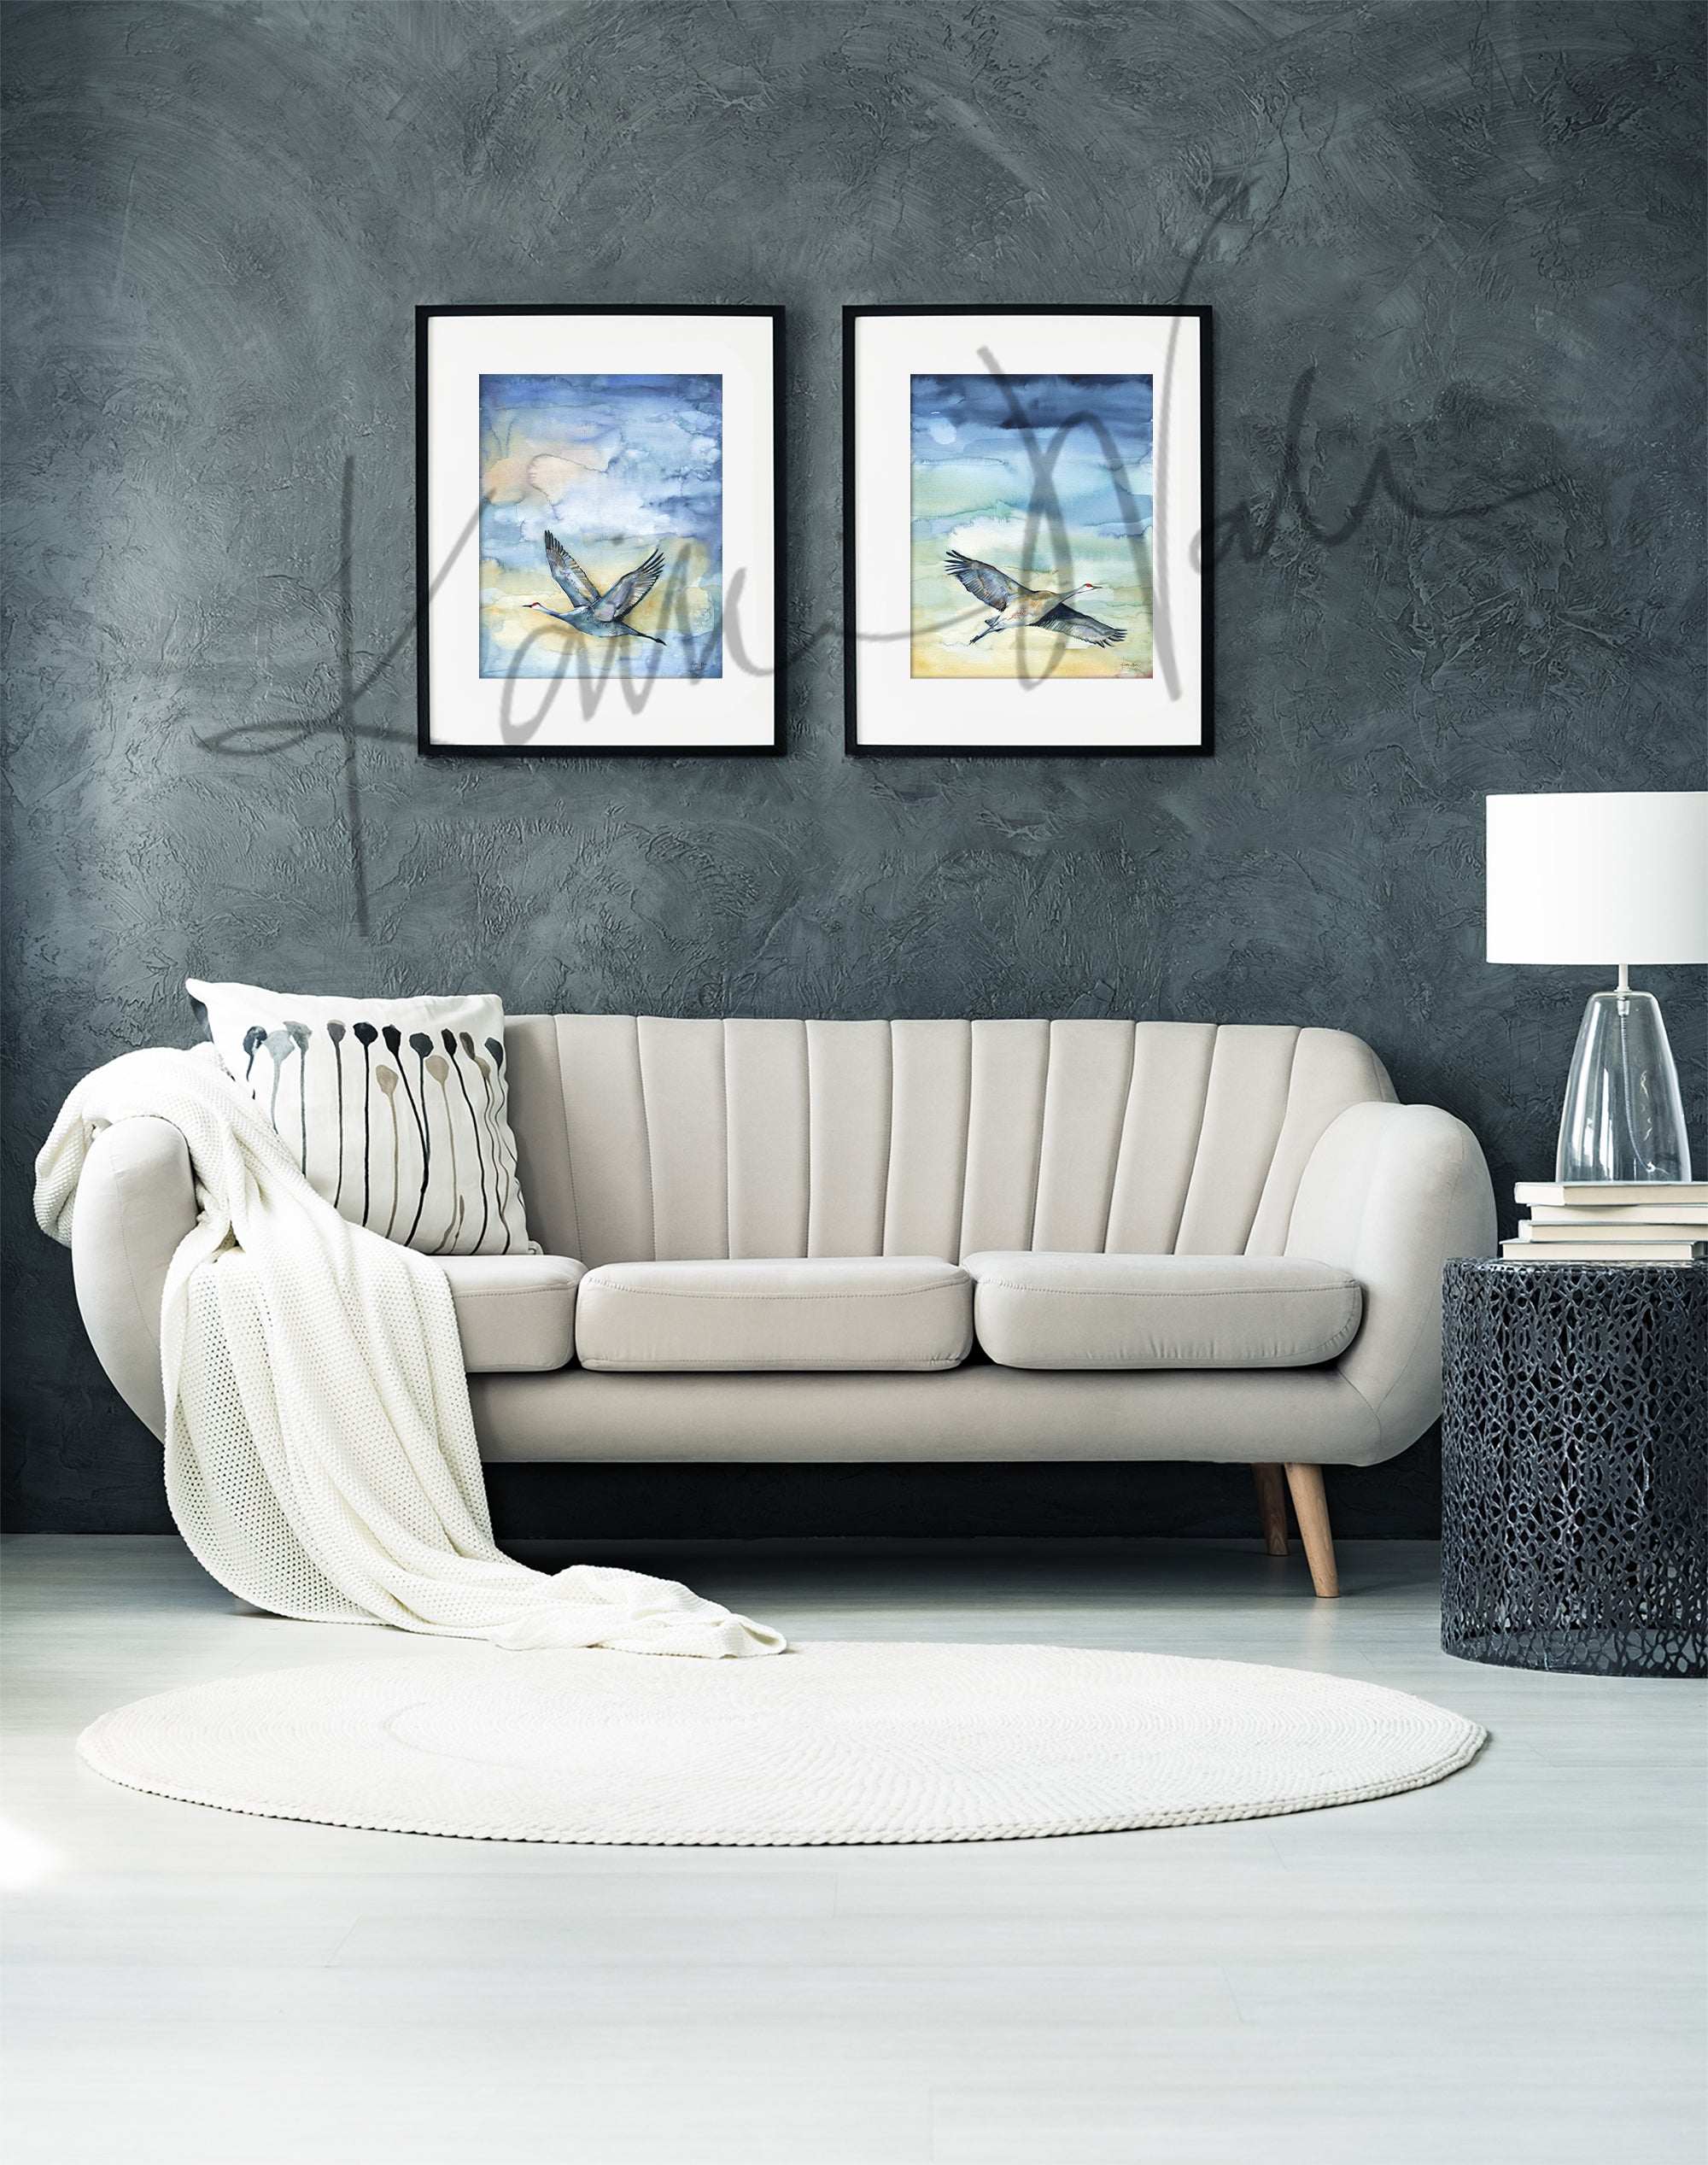 Framed watercolor painting set of flying cranes. The paintings are hanging over a beige couch.